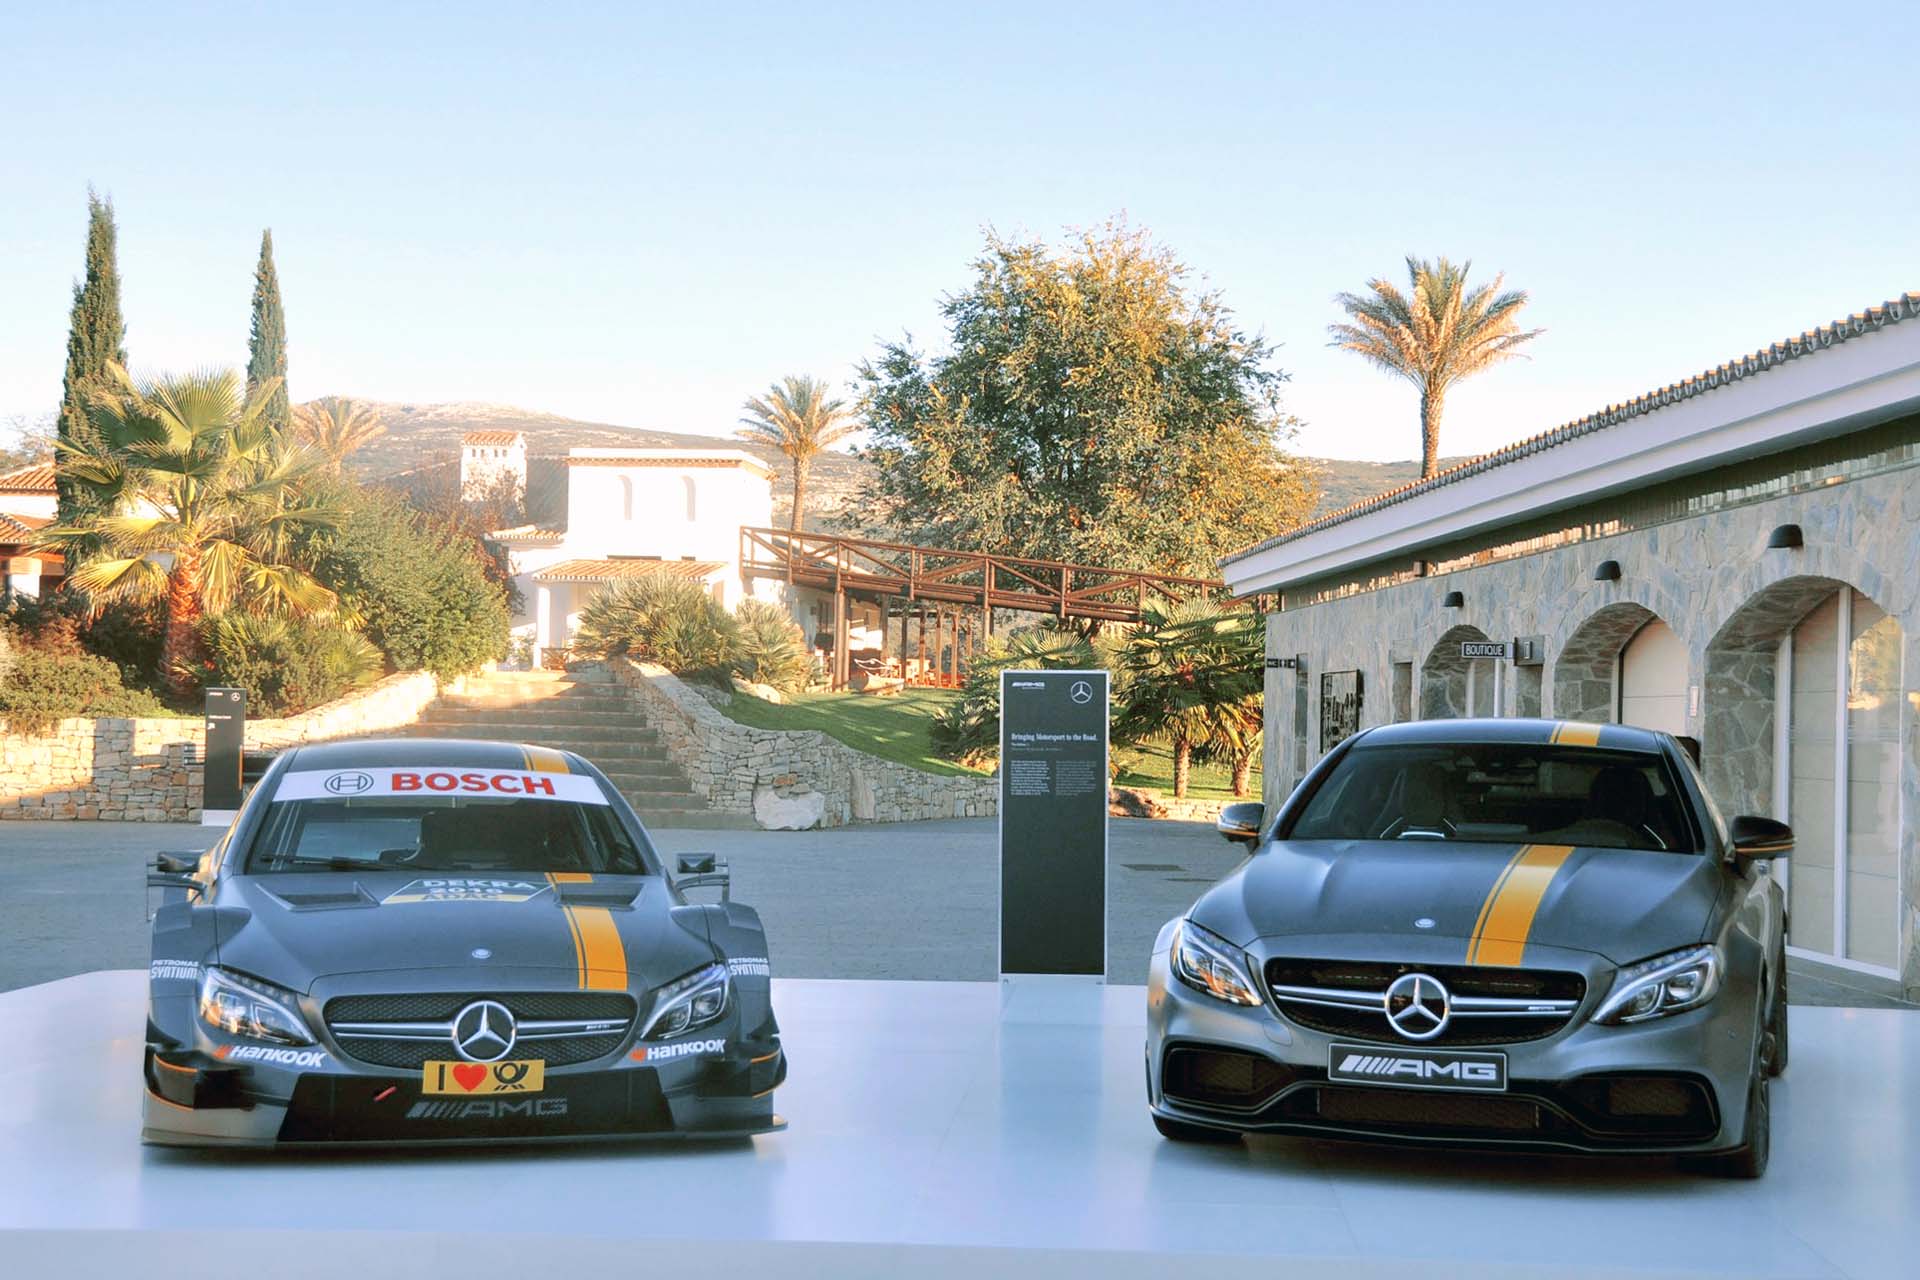 Next to the Touring Car is the Edition 1. This is a special model inspired by motor sport for the market launch of the Mercedes-AMG C 63 and Mercedes-AMG C 63 S Coupés, inspired by the DTM version. We'll get about 10 of these in Canada.